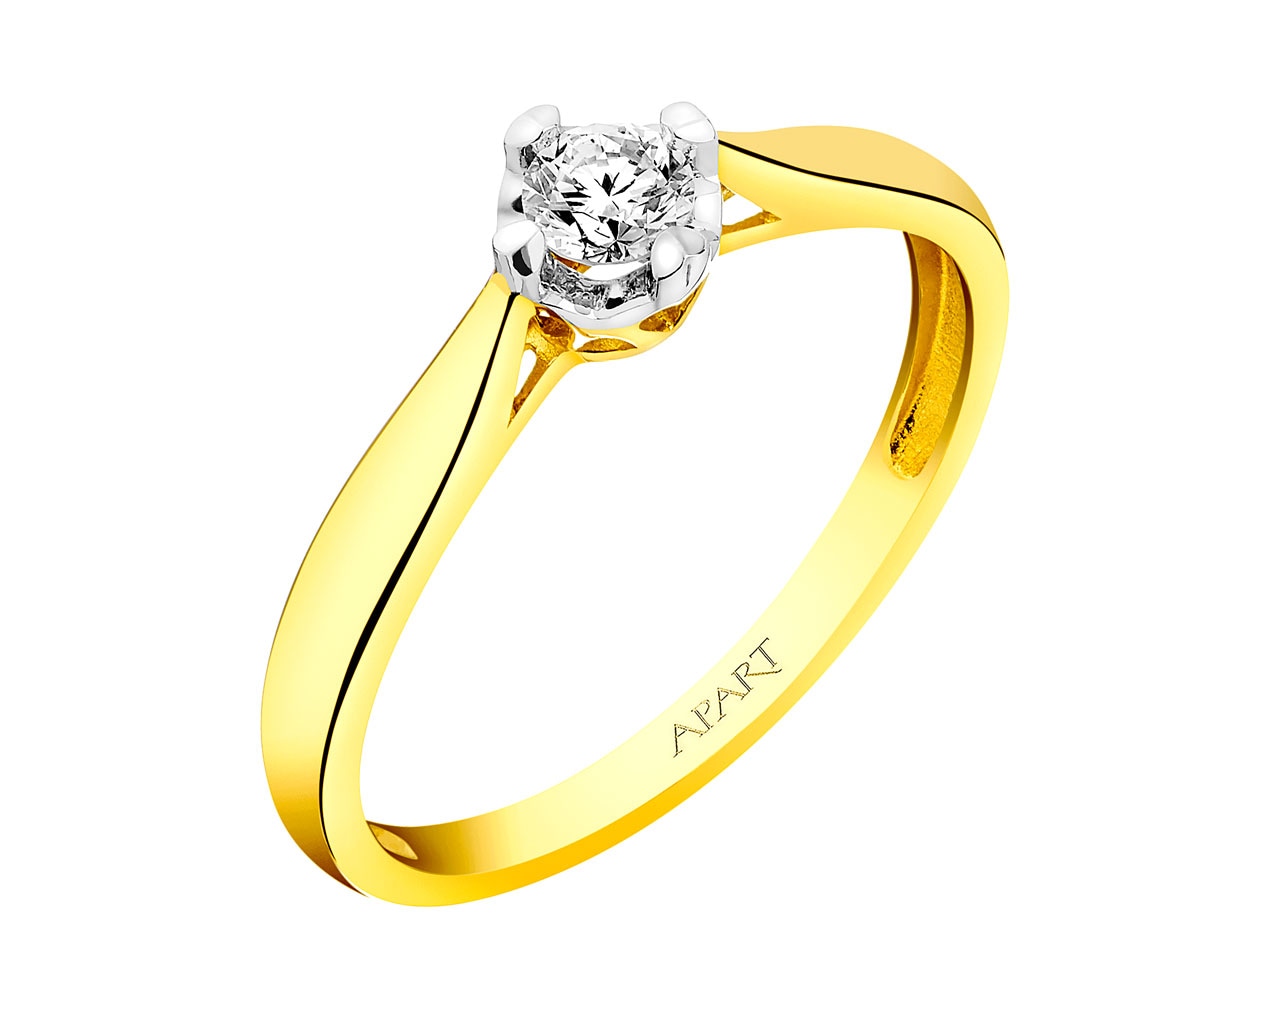 14 K Yellow Gold Ring with Diamond 0,16 ct - fineness 14 K